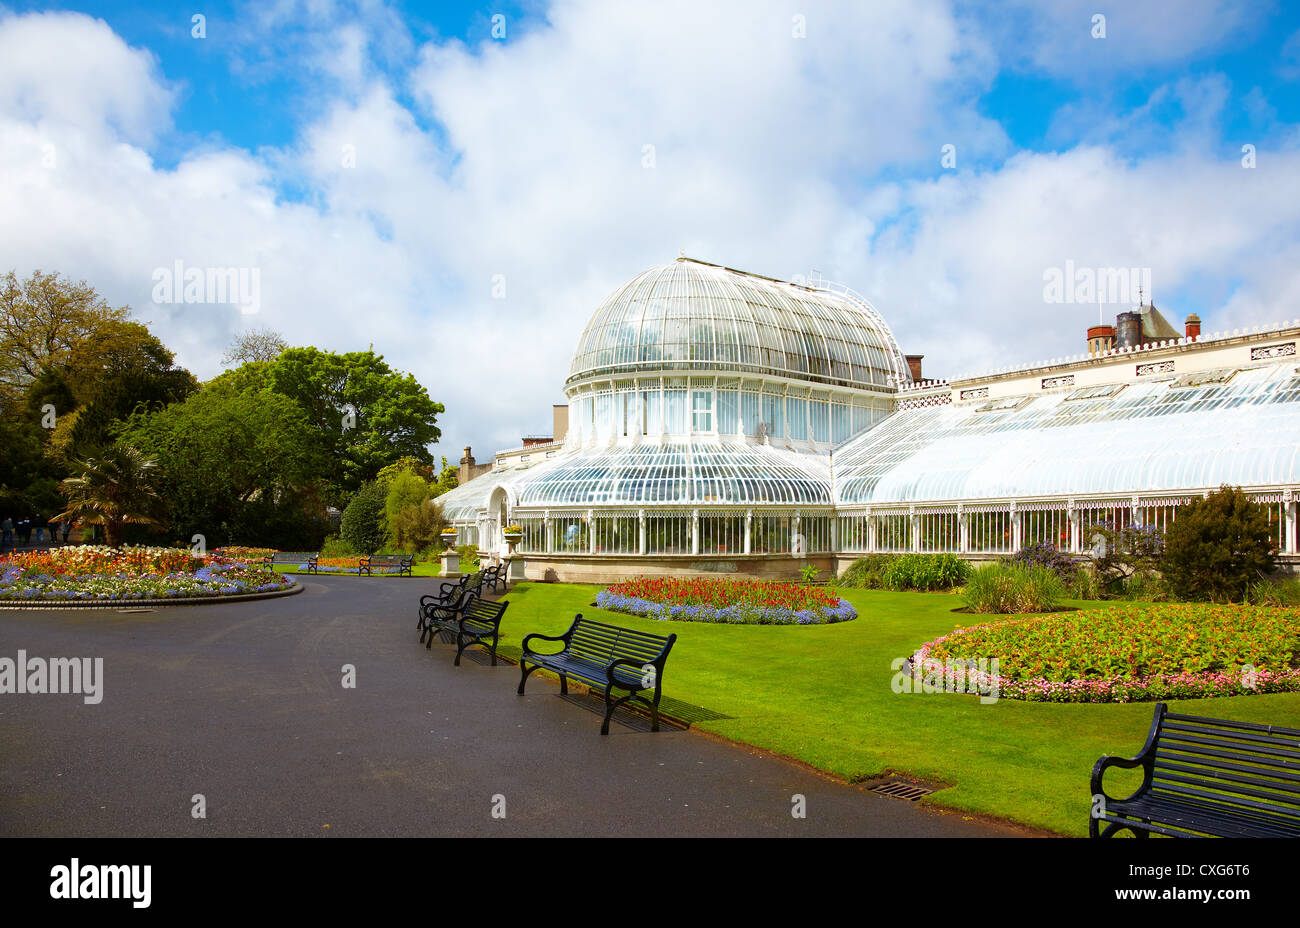 The Palm House at the Botanic Gardens Stock Photo